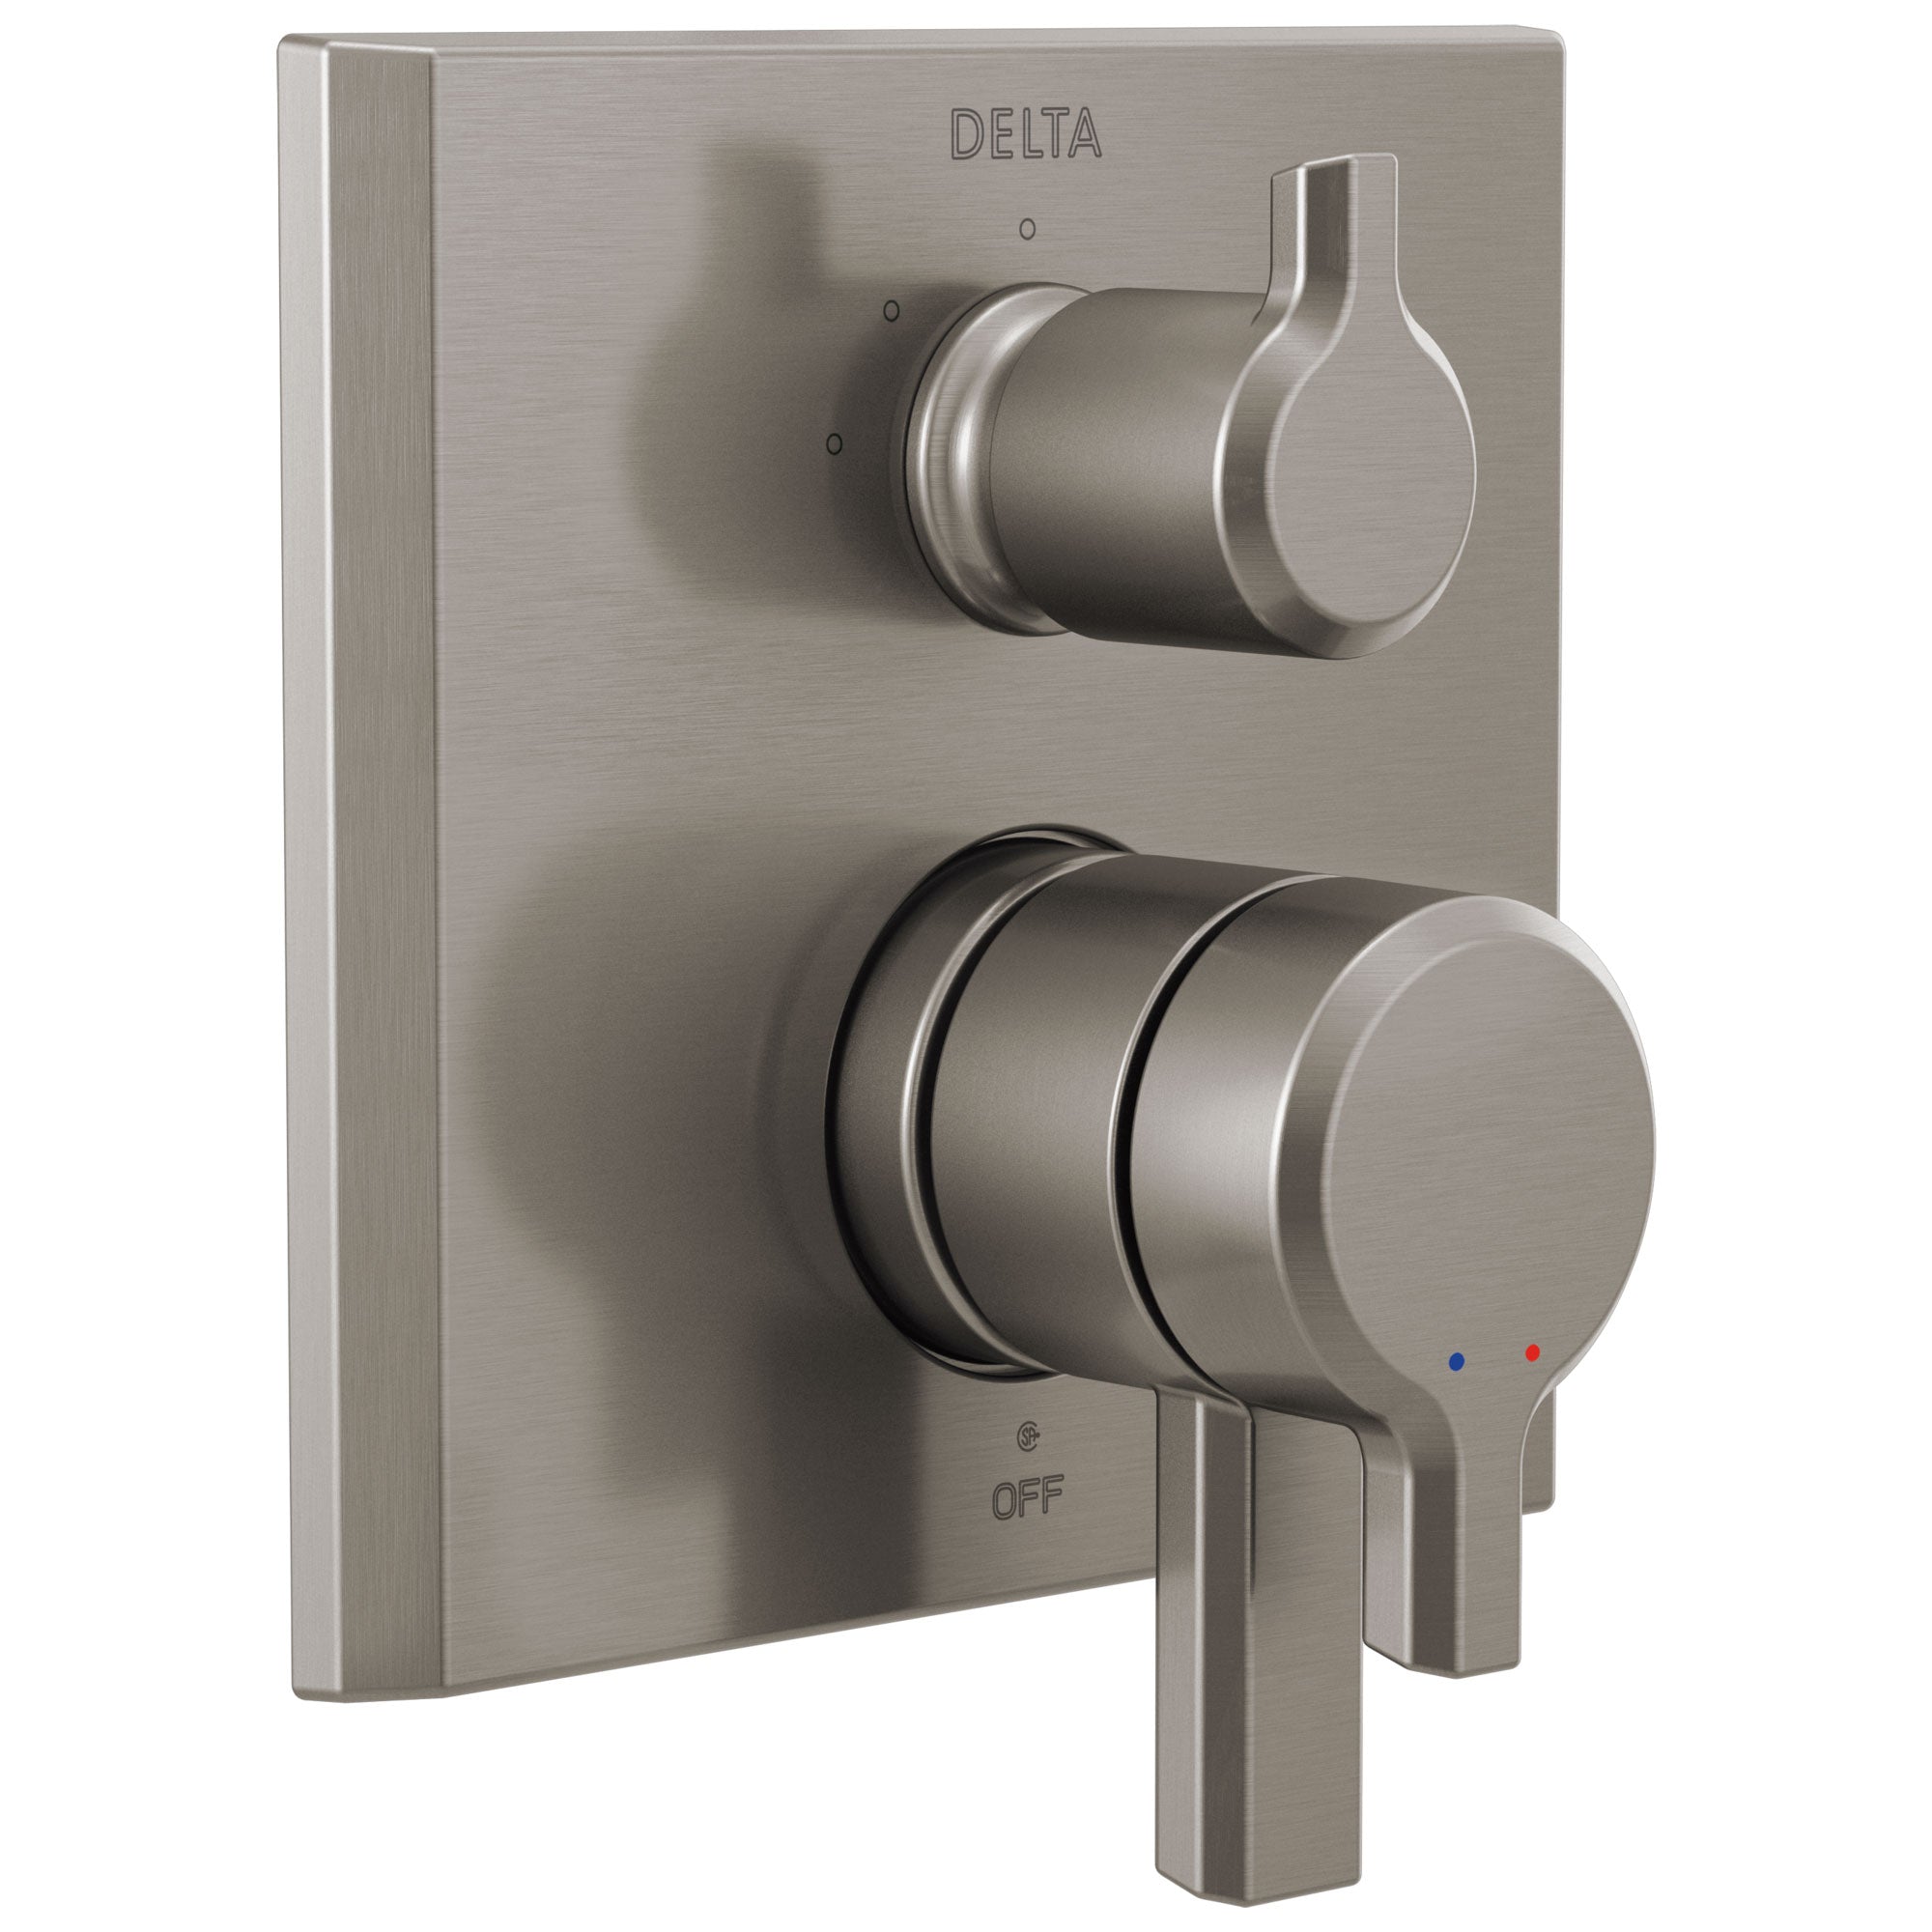 Delta Pivotal Stainless Steel Finish Monitor 17 Series Shower System Control with 3-Setting Diverter Includes Rough-in Valve and Handles D3134V